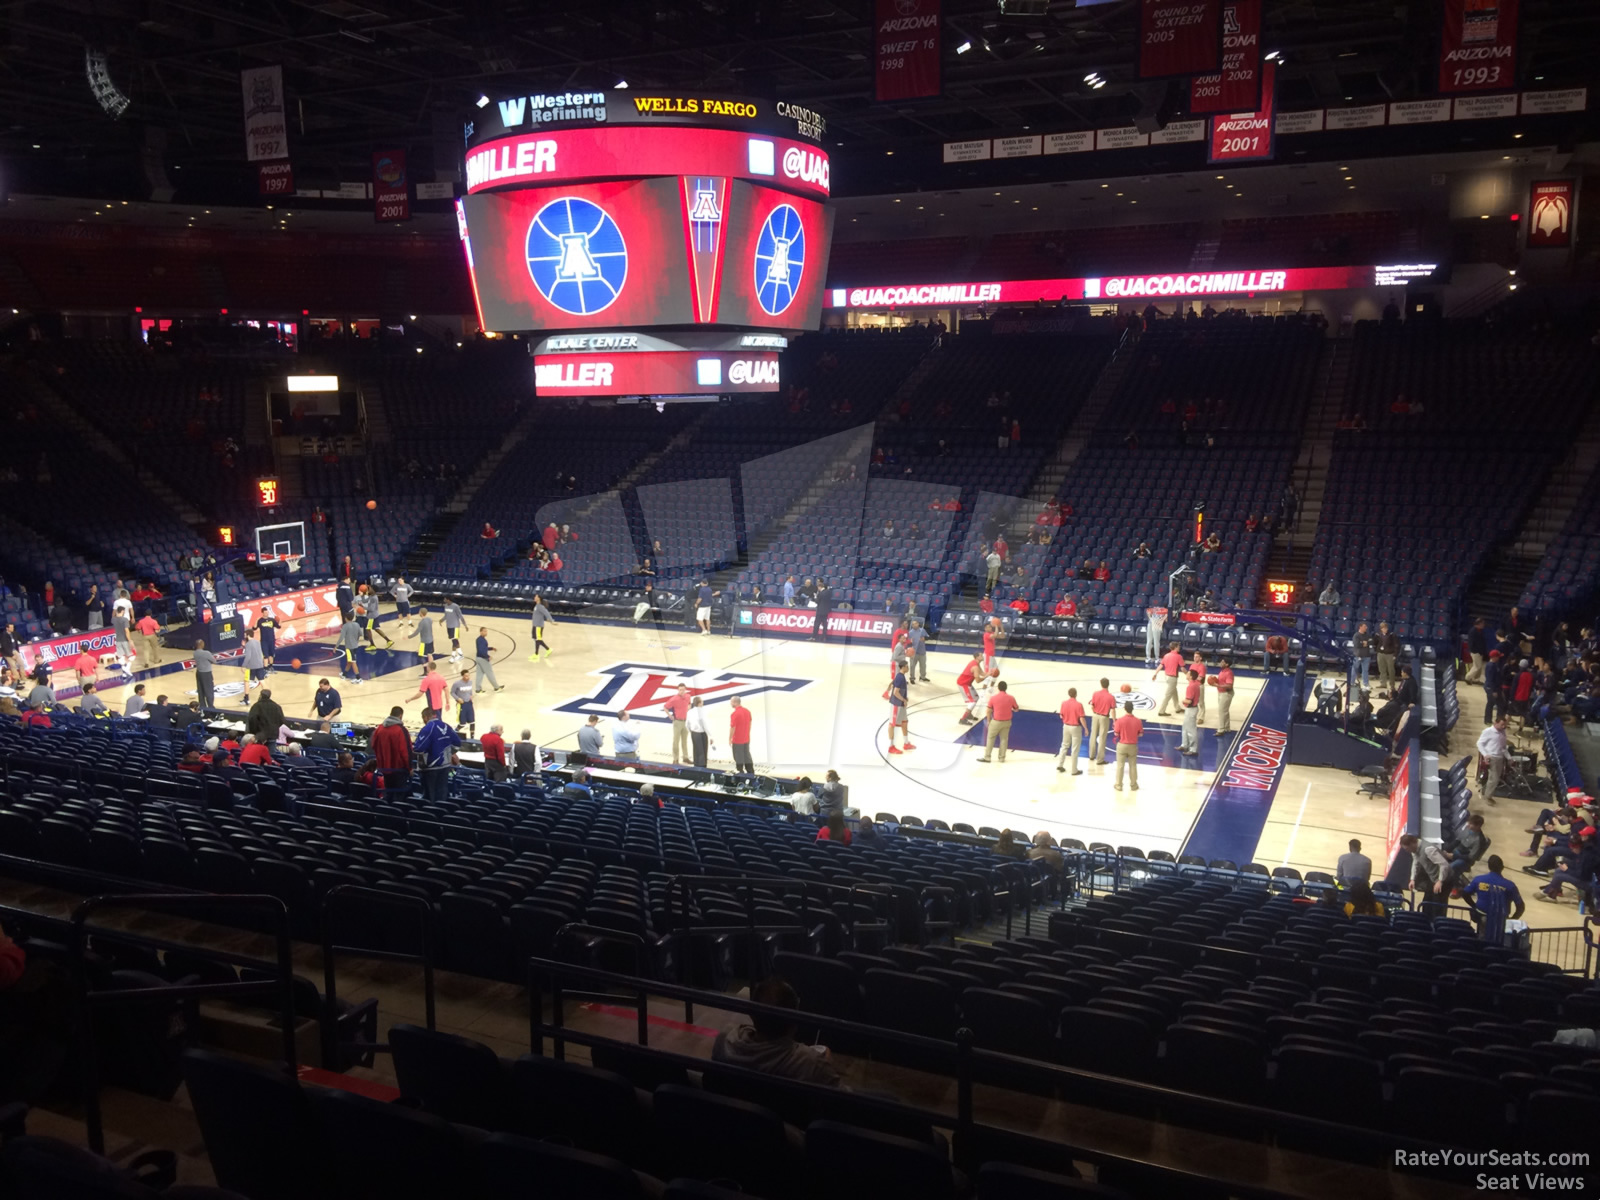 section 1, row 23 seat view  - mckale center